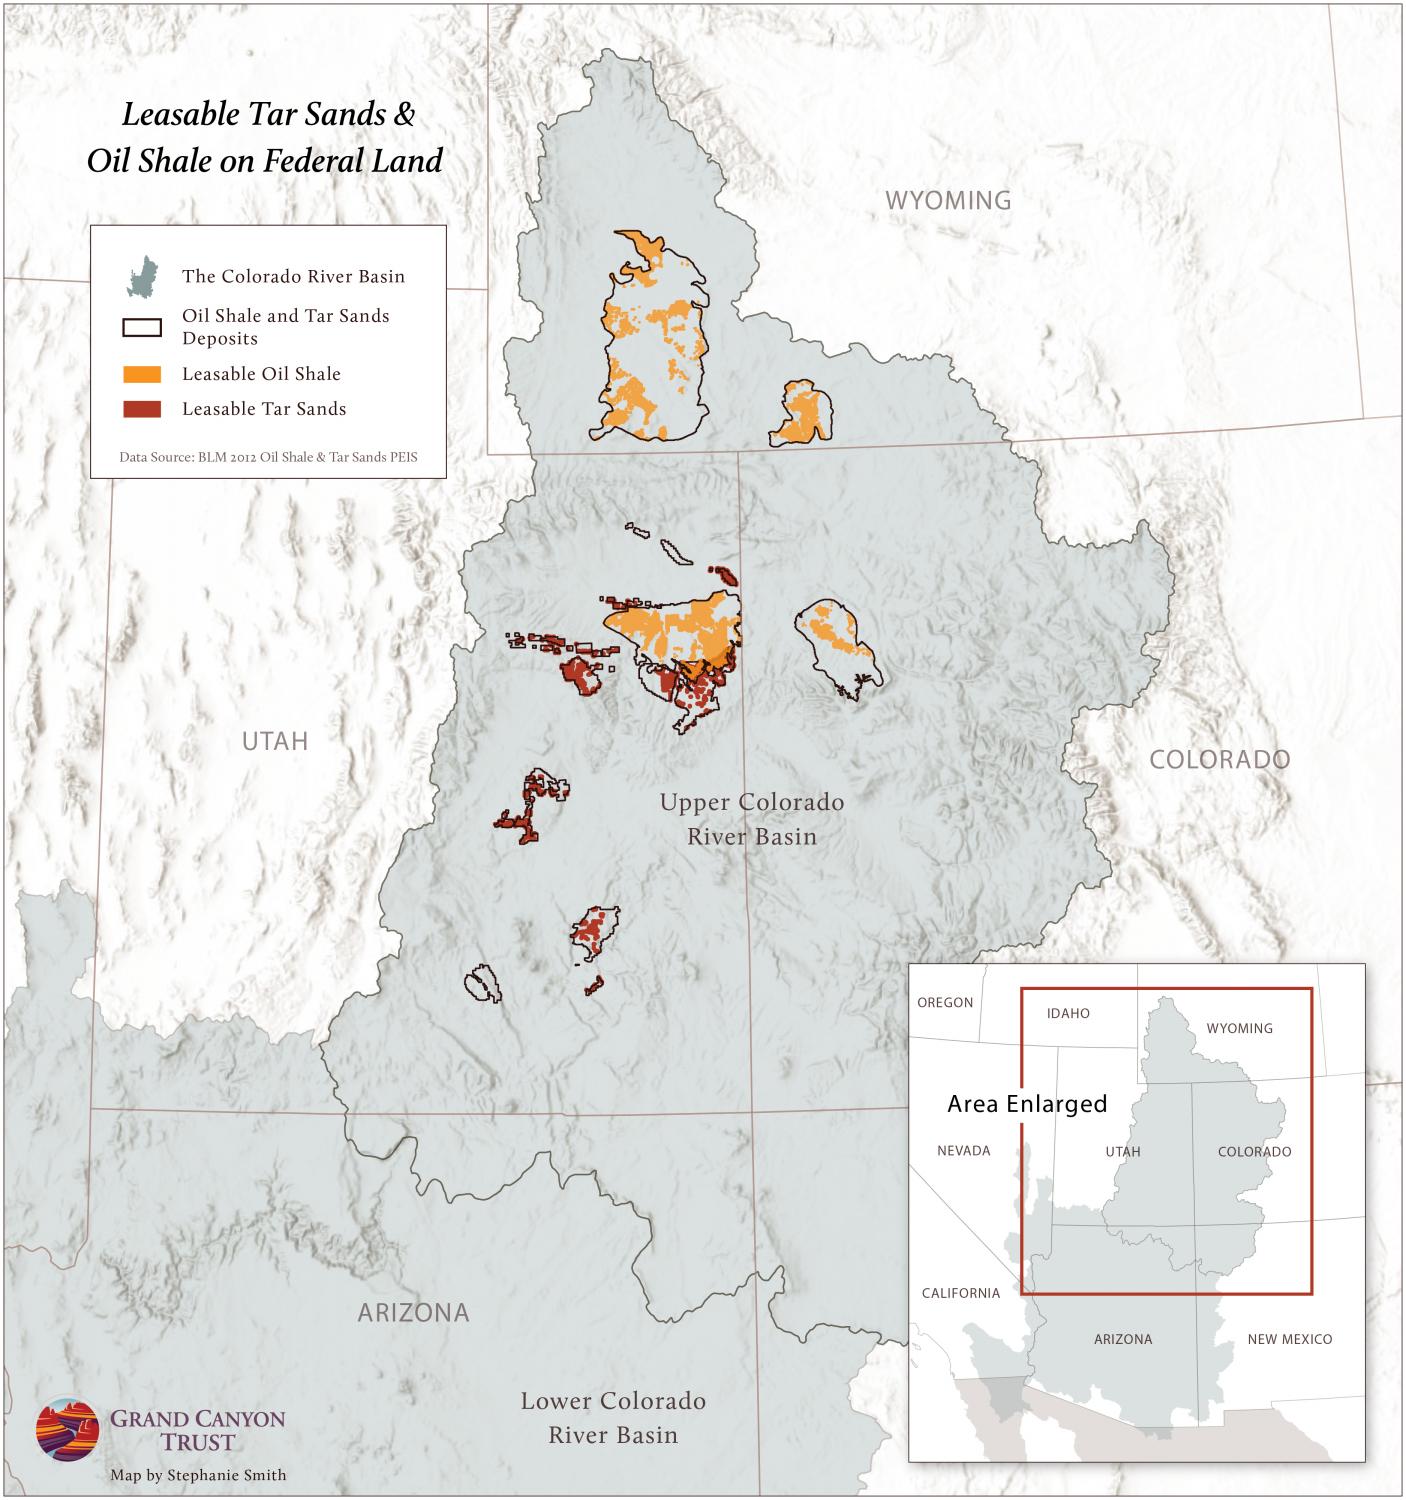 Leasable Tar Sands and Oil Shale Colorado River Basin map